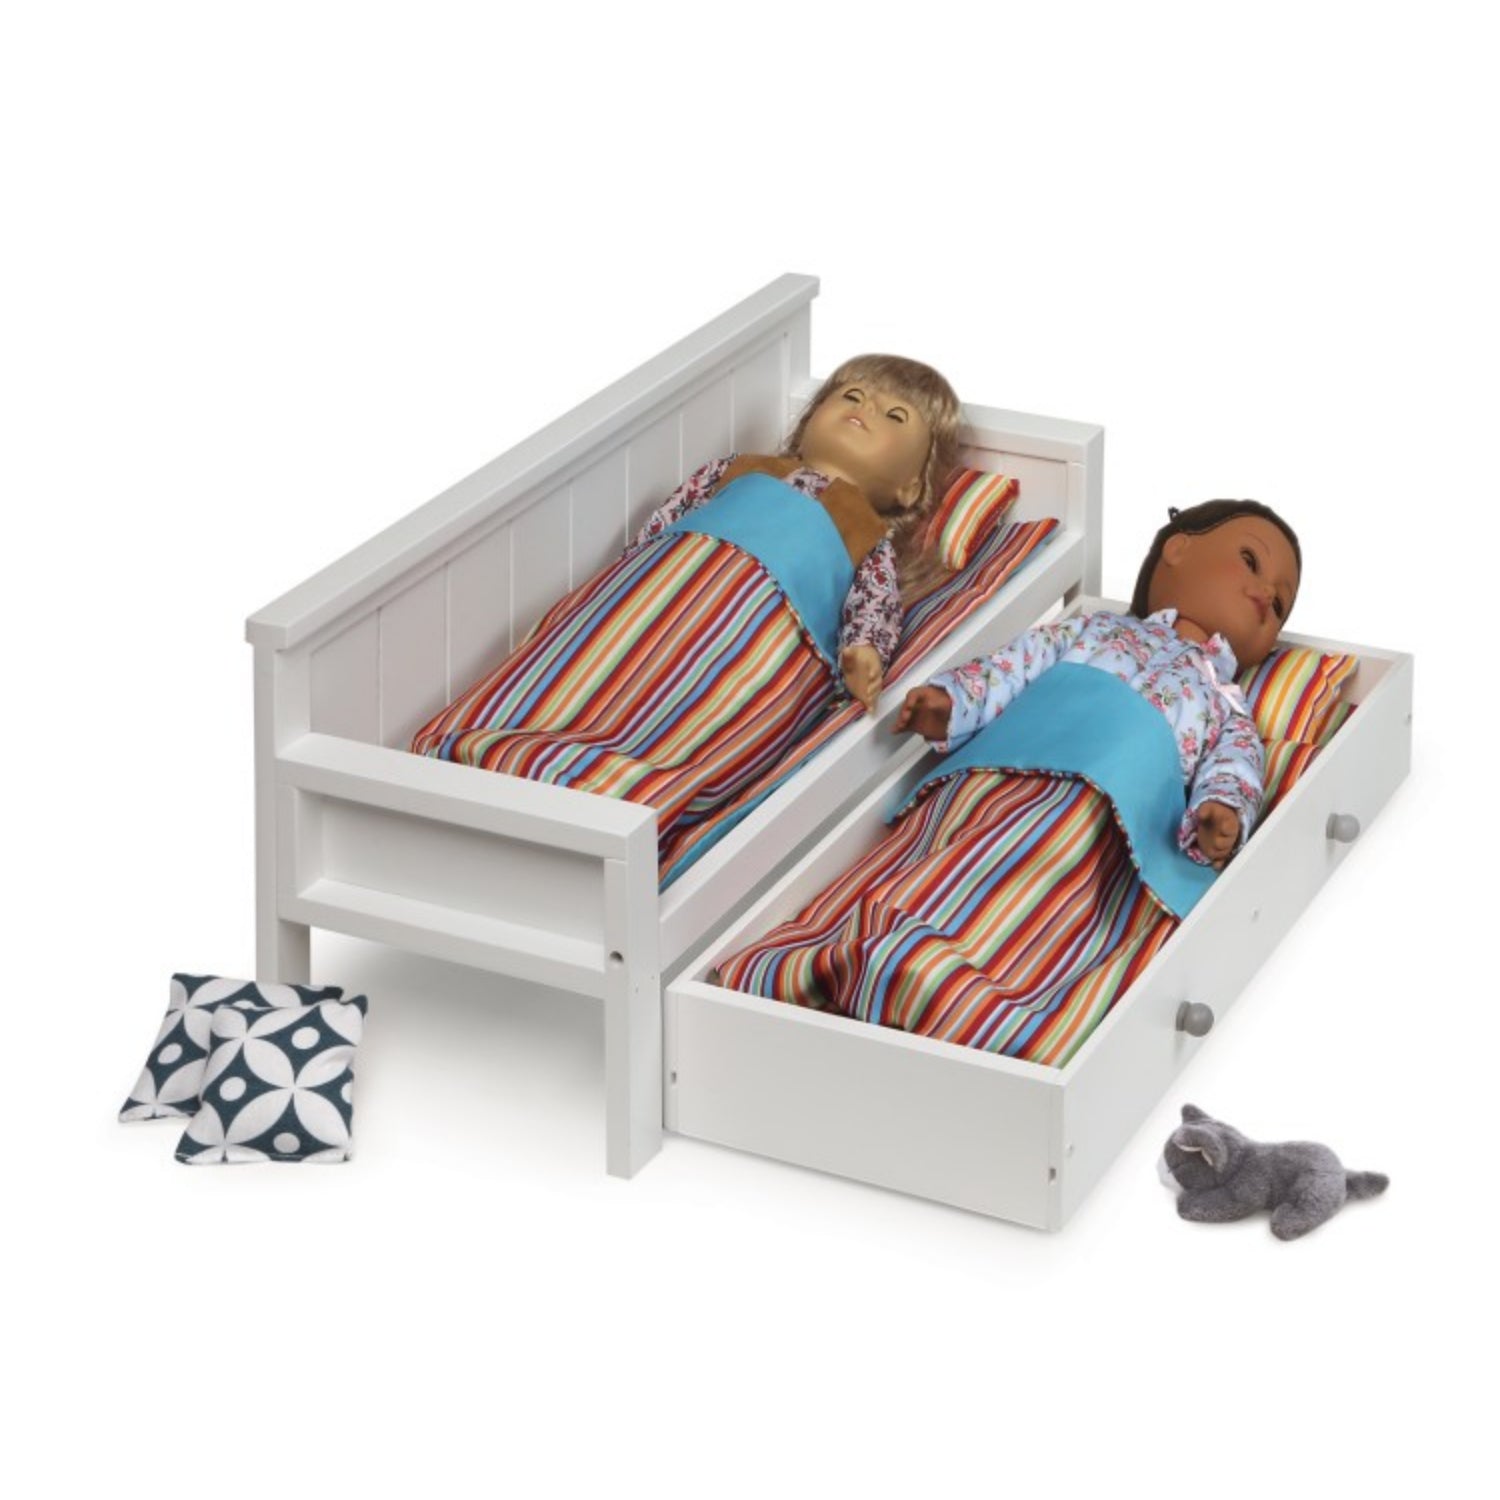 Badger Basket Sofa/Daybed with Trundle for 18 inch Dolls – White/Multi